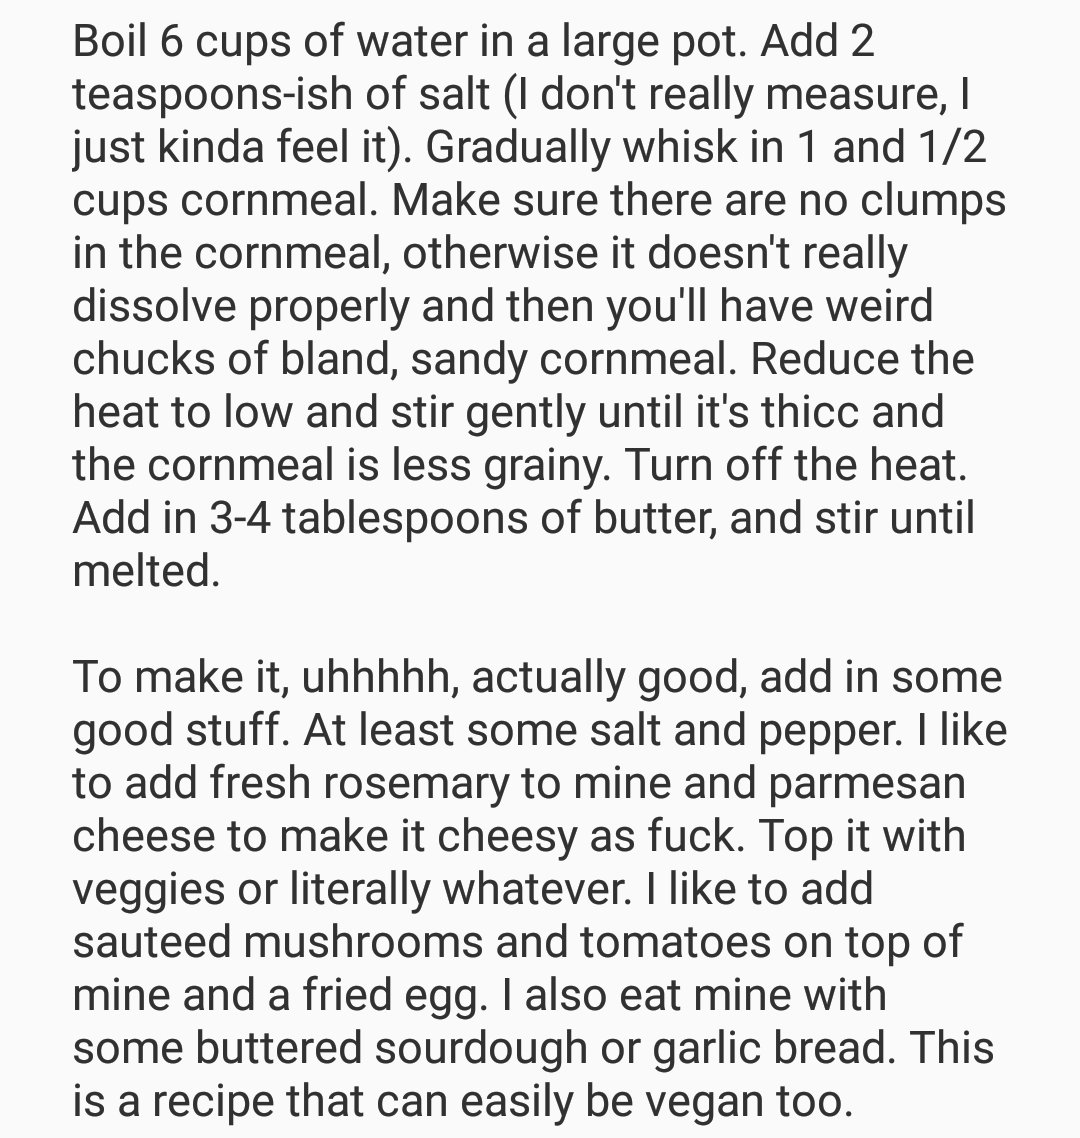 Polenta Recipe. Literally one of the cheapest things to make in my opinion. They also sell premade polenta in tubes but if you invest in a big bad of cornmeal you can feed yourself for a while making your own. This recipe will make like ?????? 4 servings-ish.